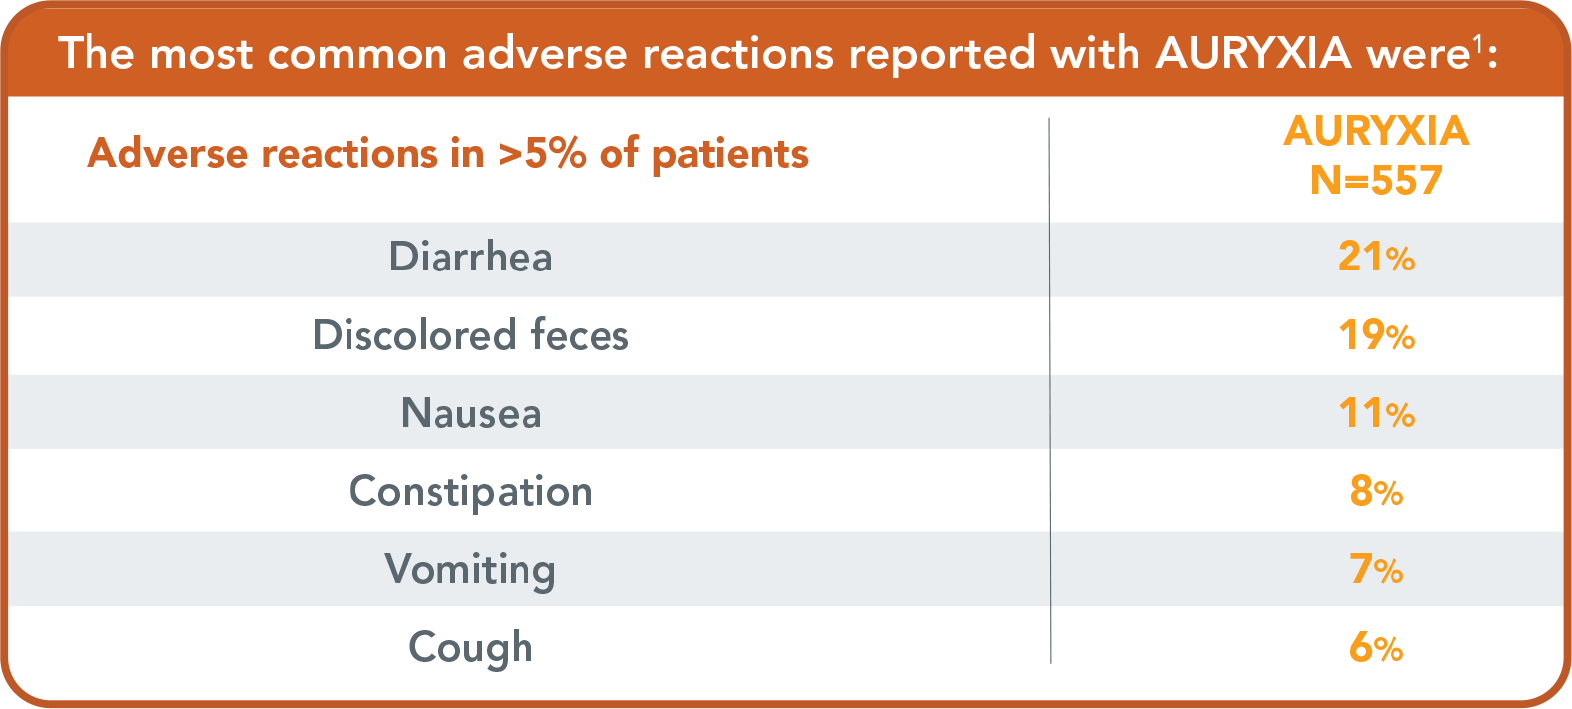 The most common adverse reactions reported with AURYXIA table